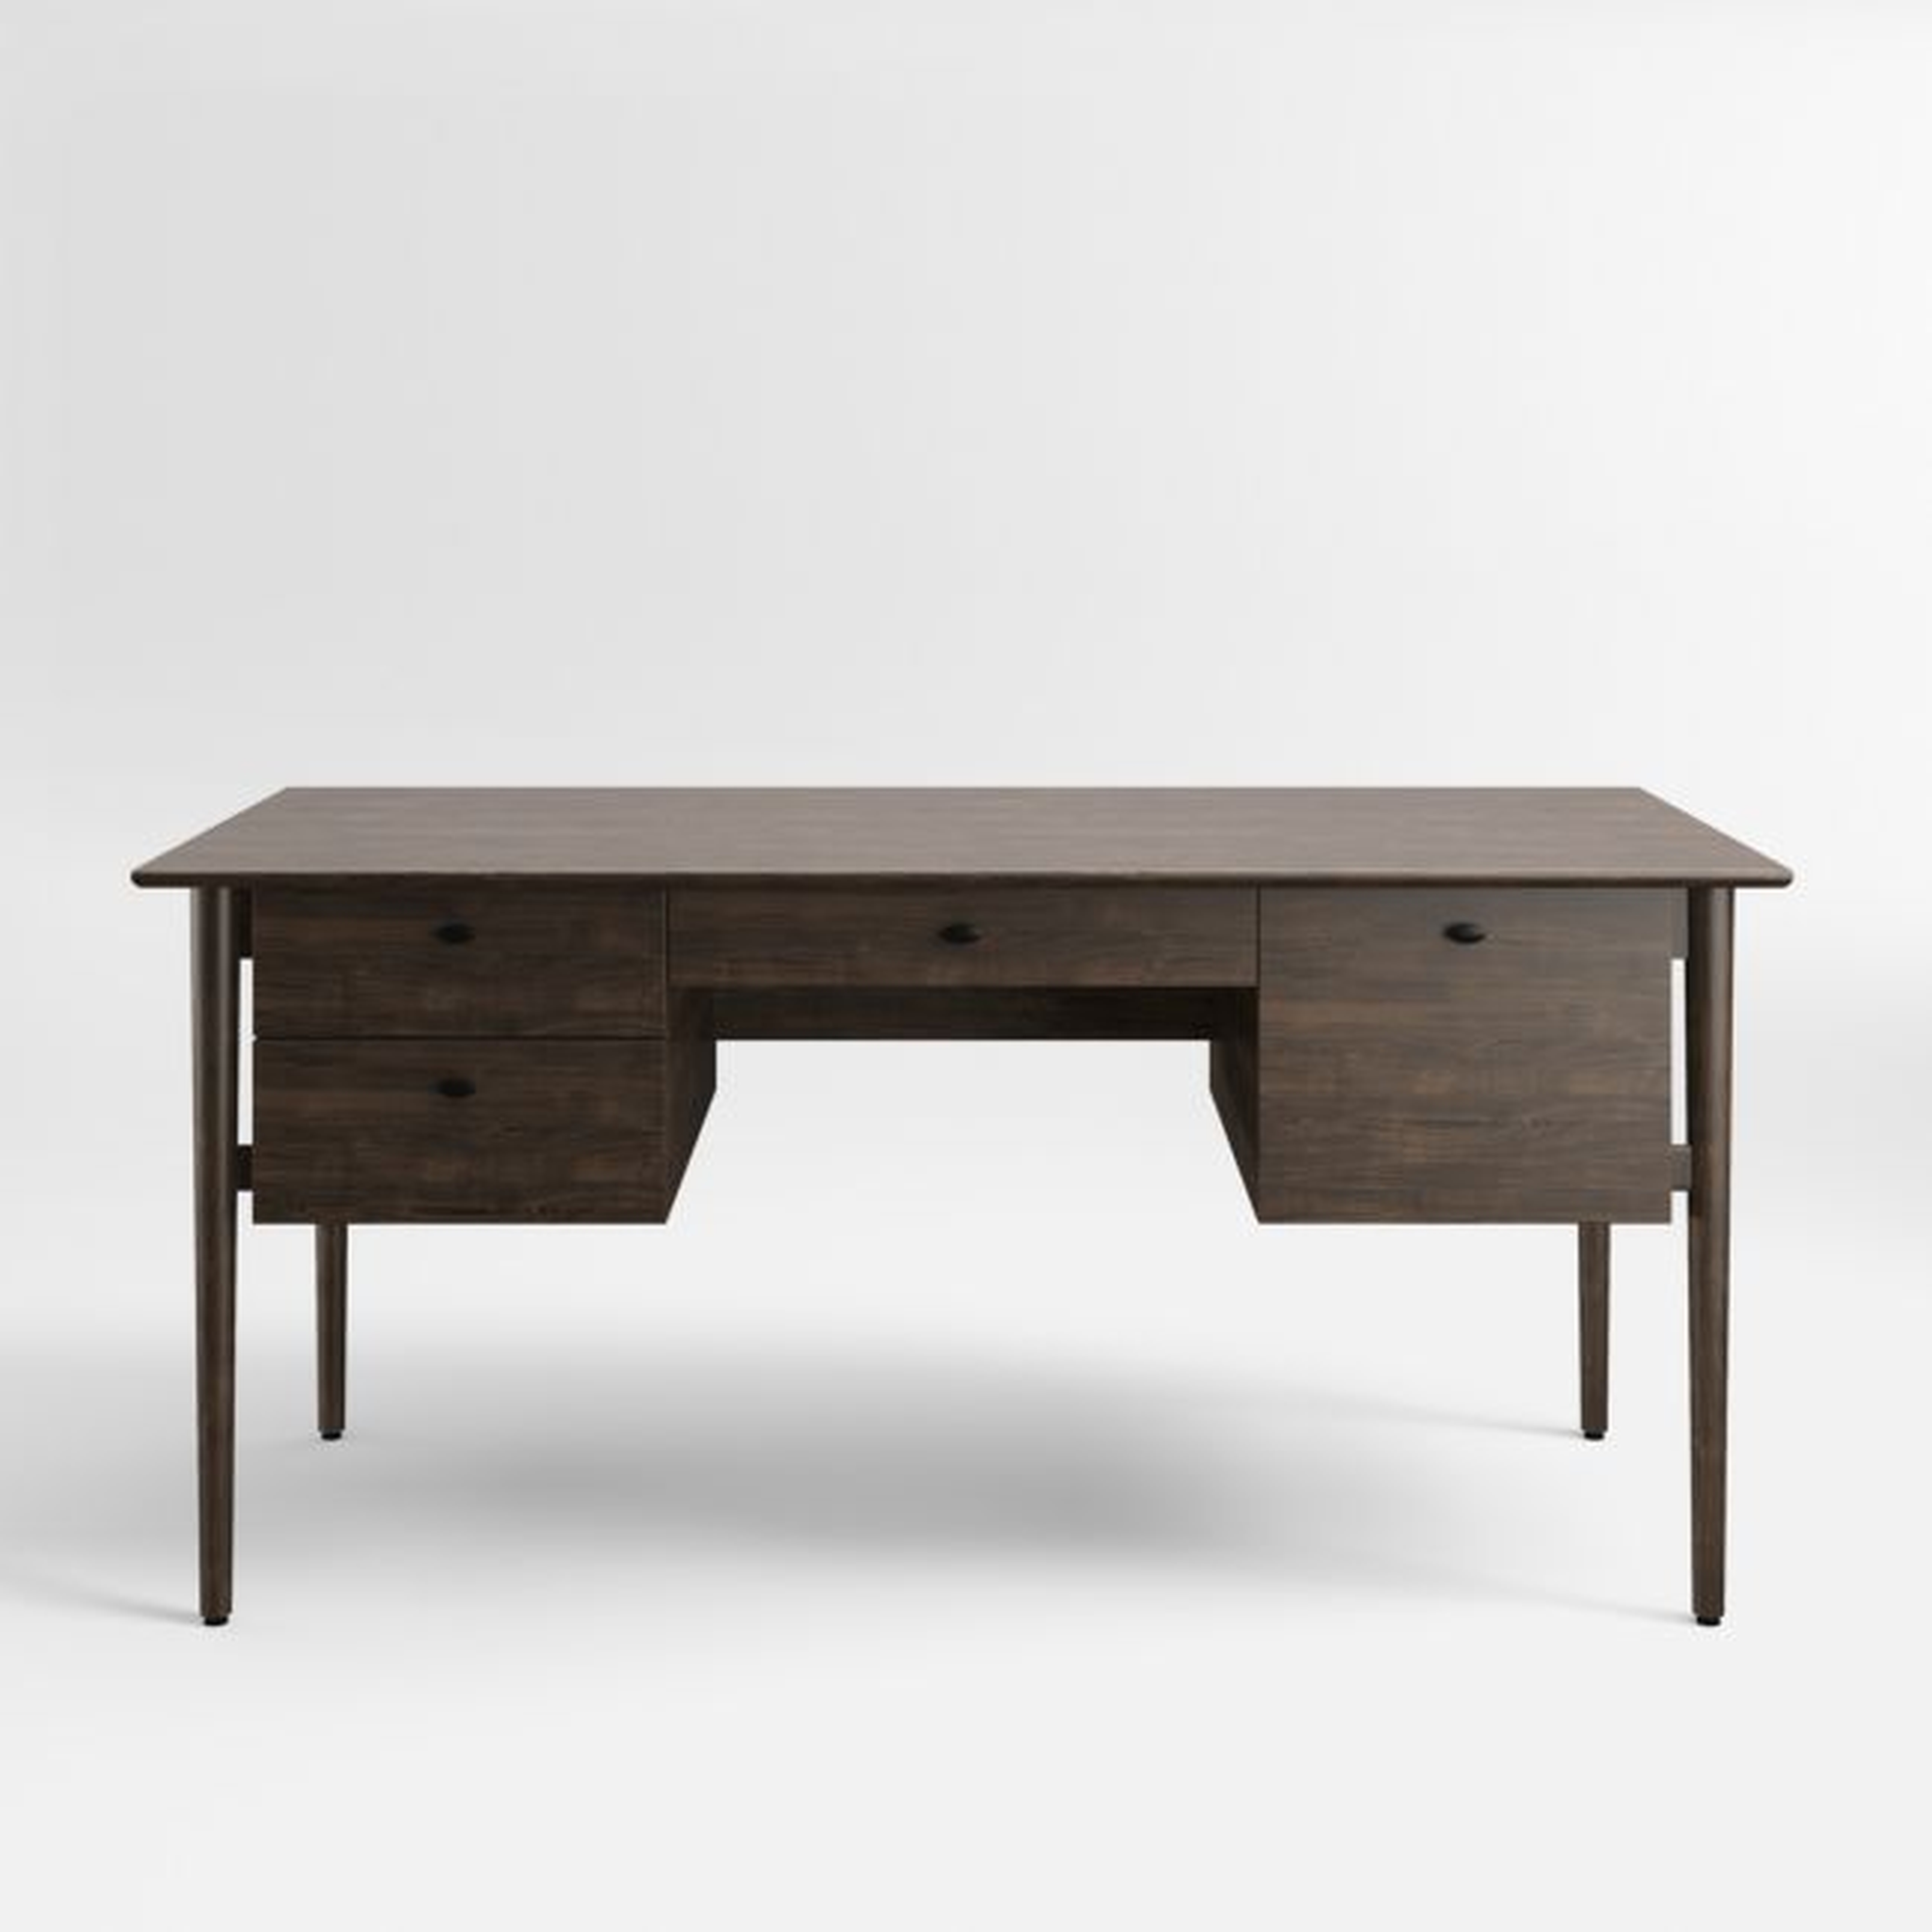 Kendall Charcoal Cherry Desk - Crate and Barrel